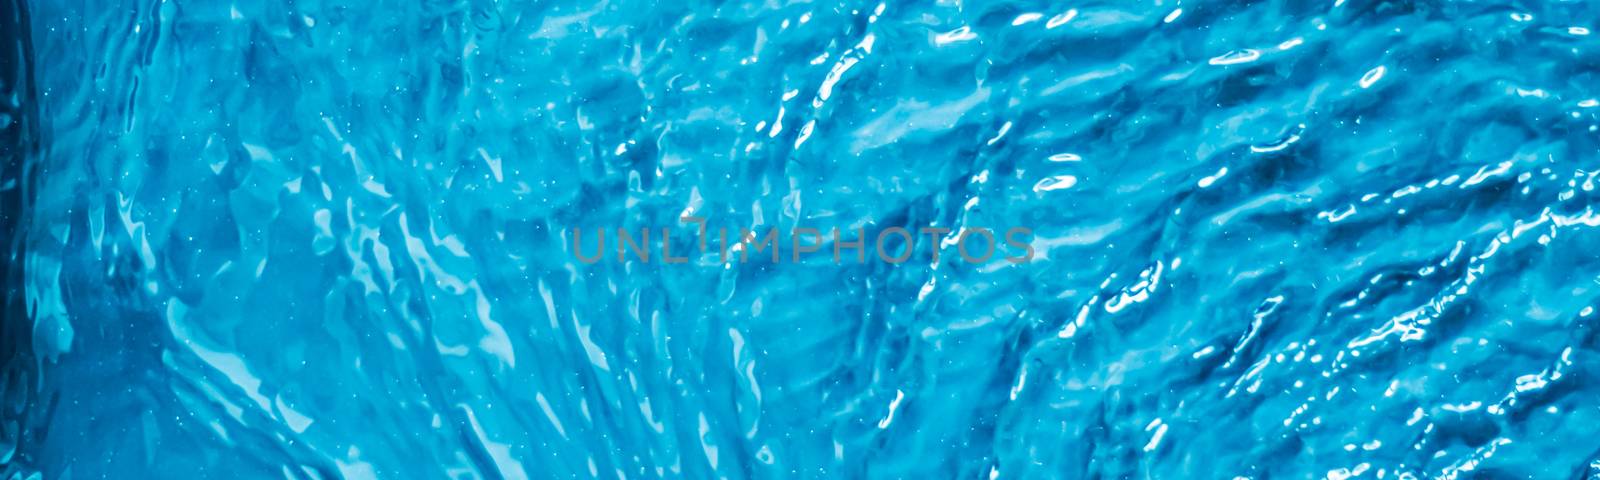 Blue water texture as abstract background, swimming pool and waves design by Anneleven